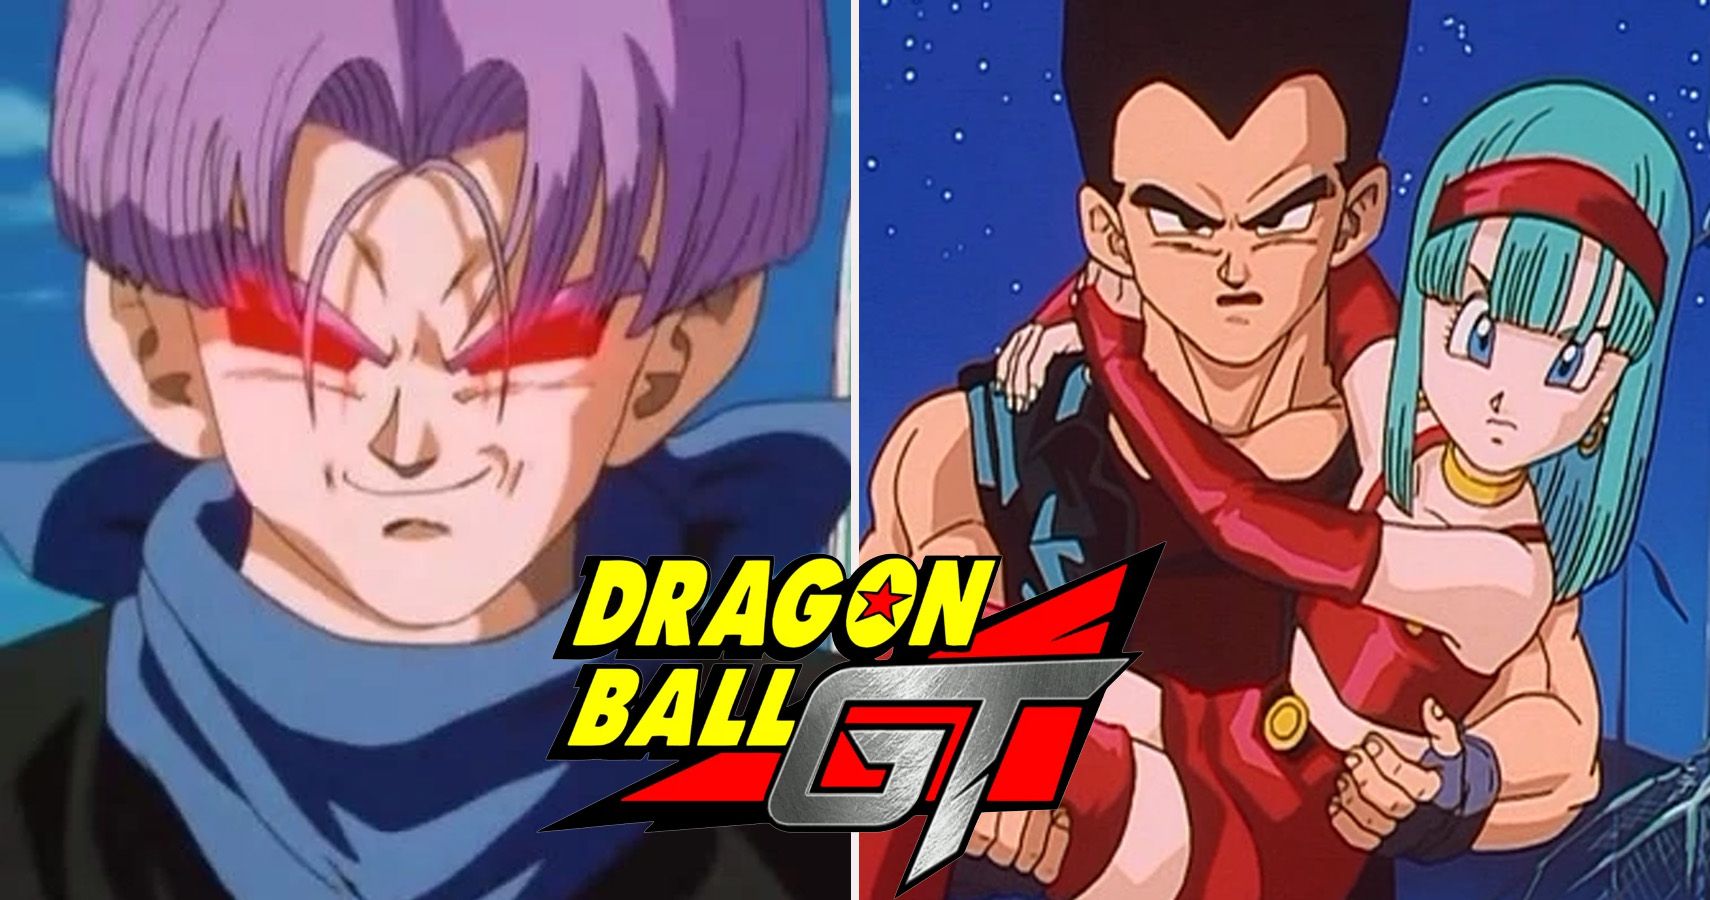 Dragon Ball GT: Final Bout (1997) - MobyGames